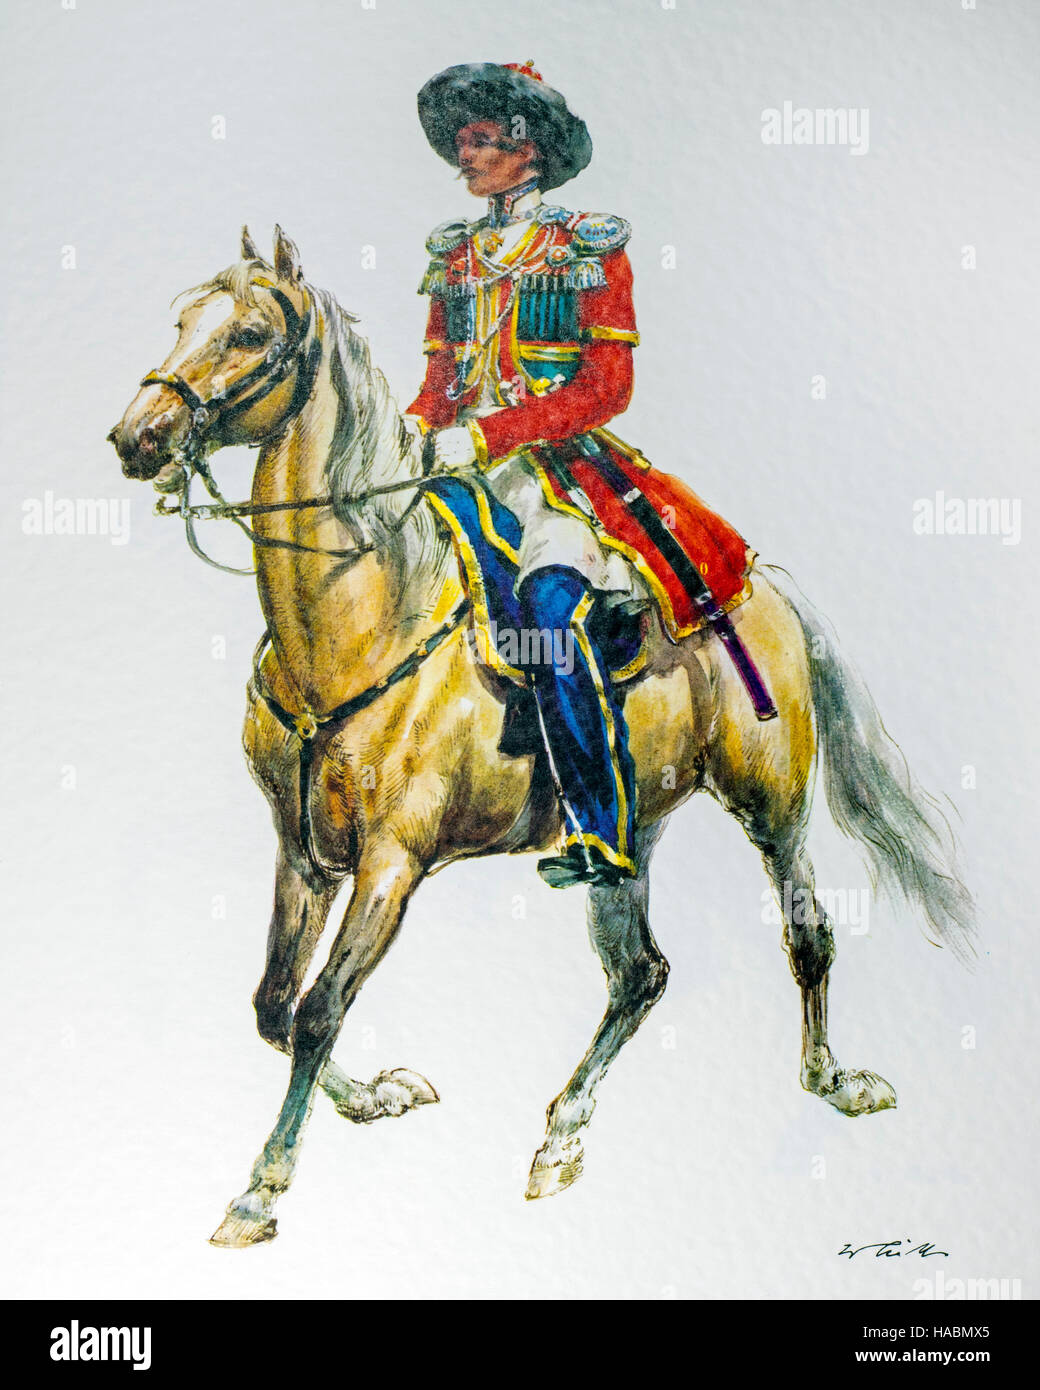 Officer on horseback of the Russian Empire in 1835 parade Cossack uniform Stock Photo